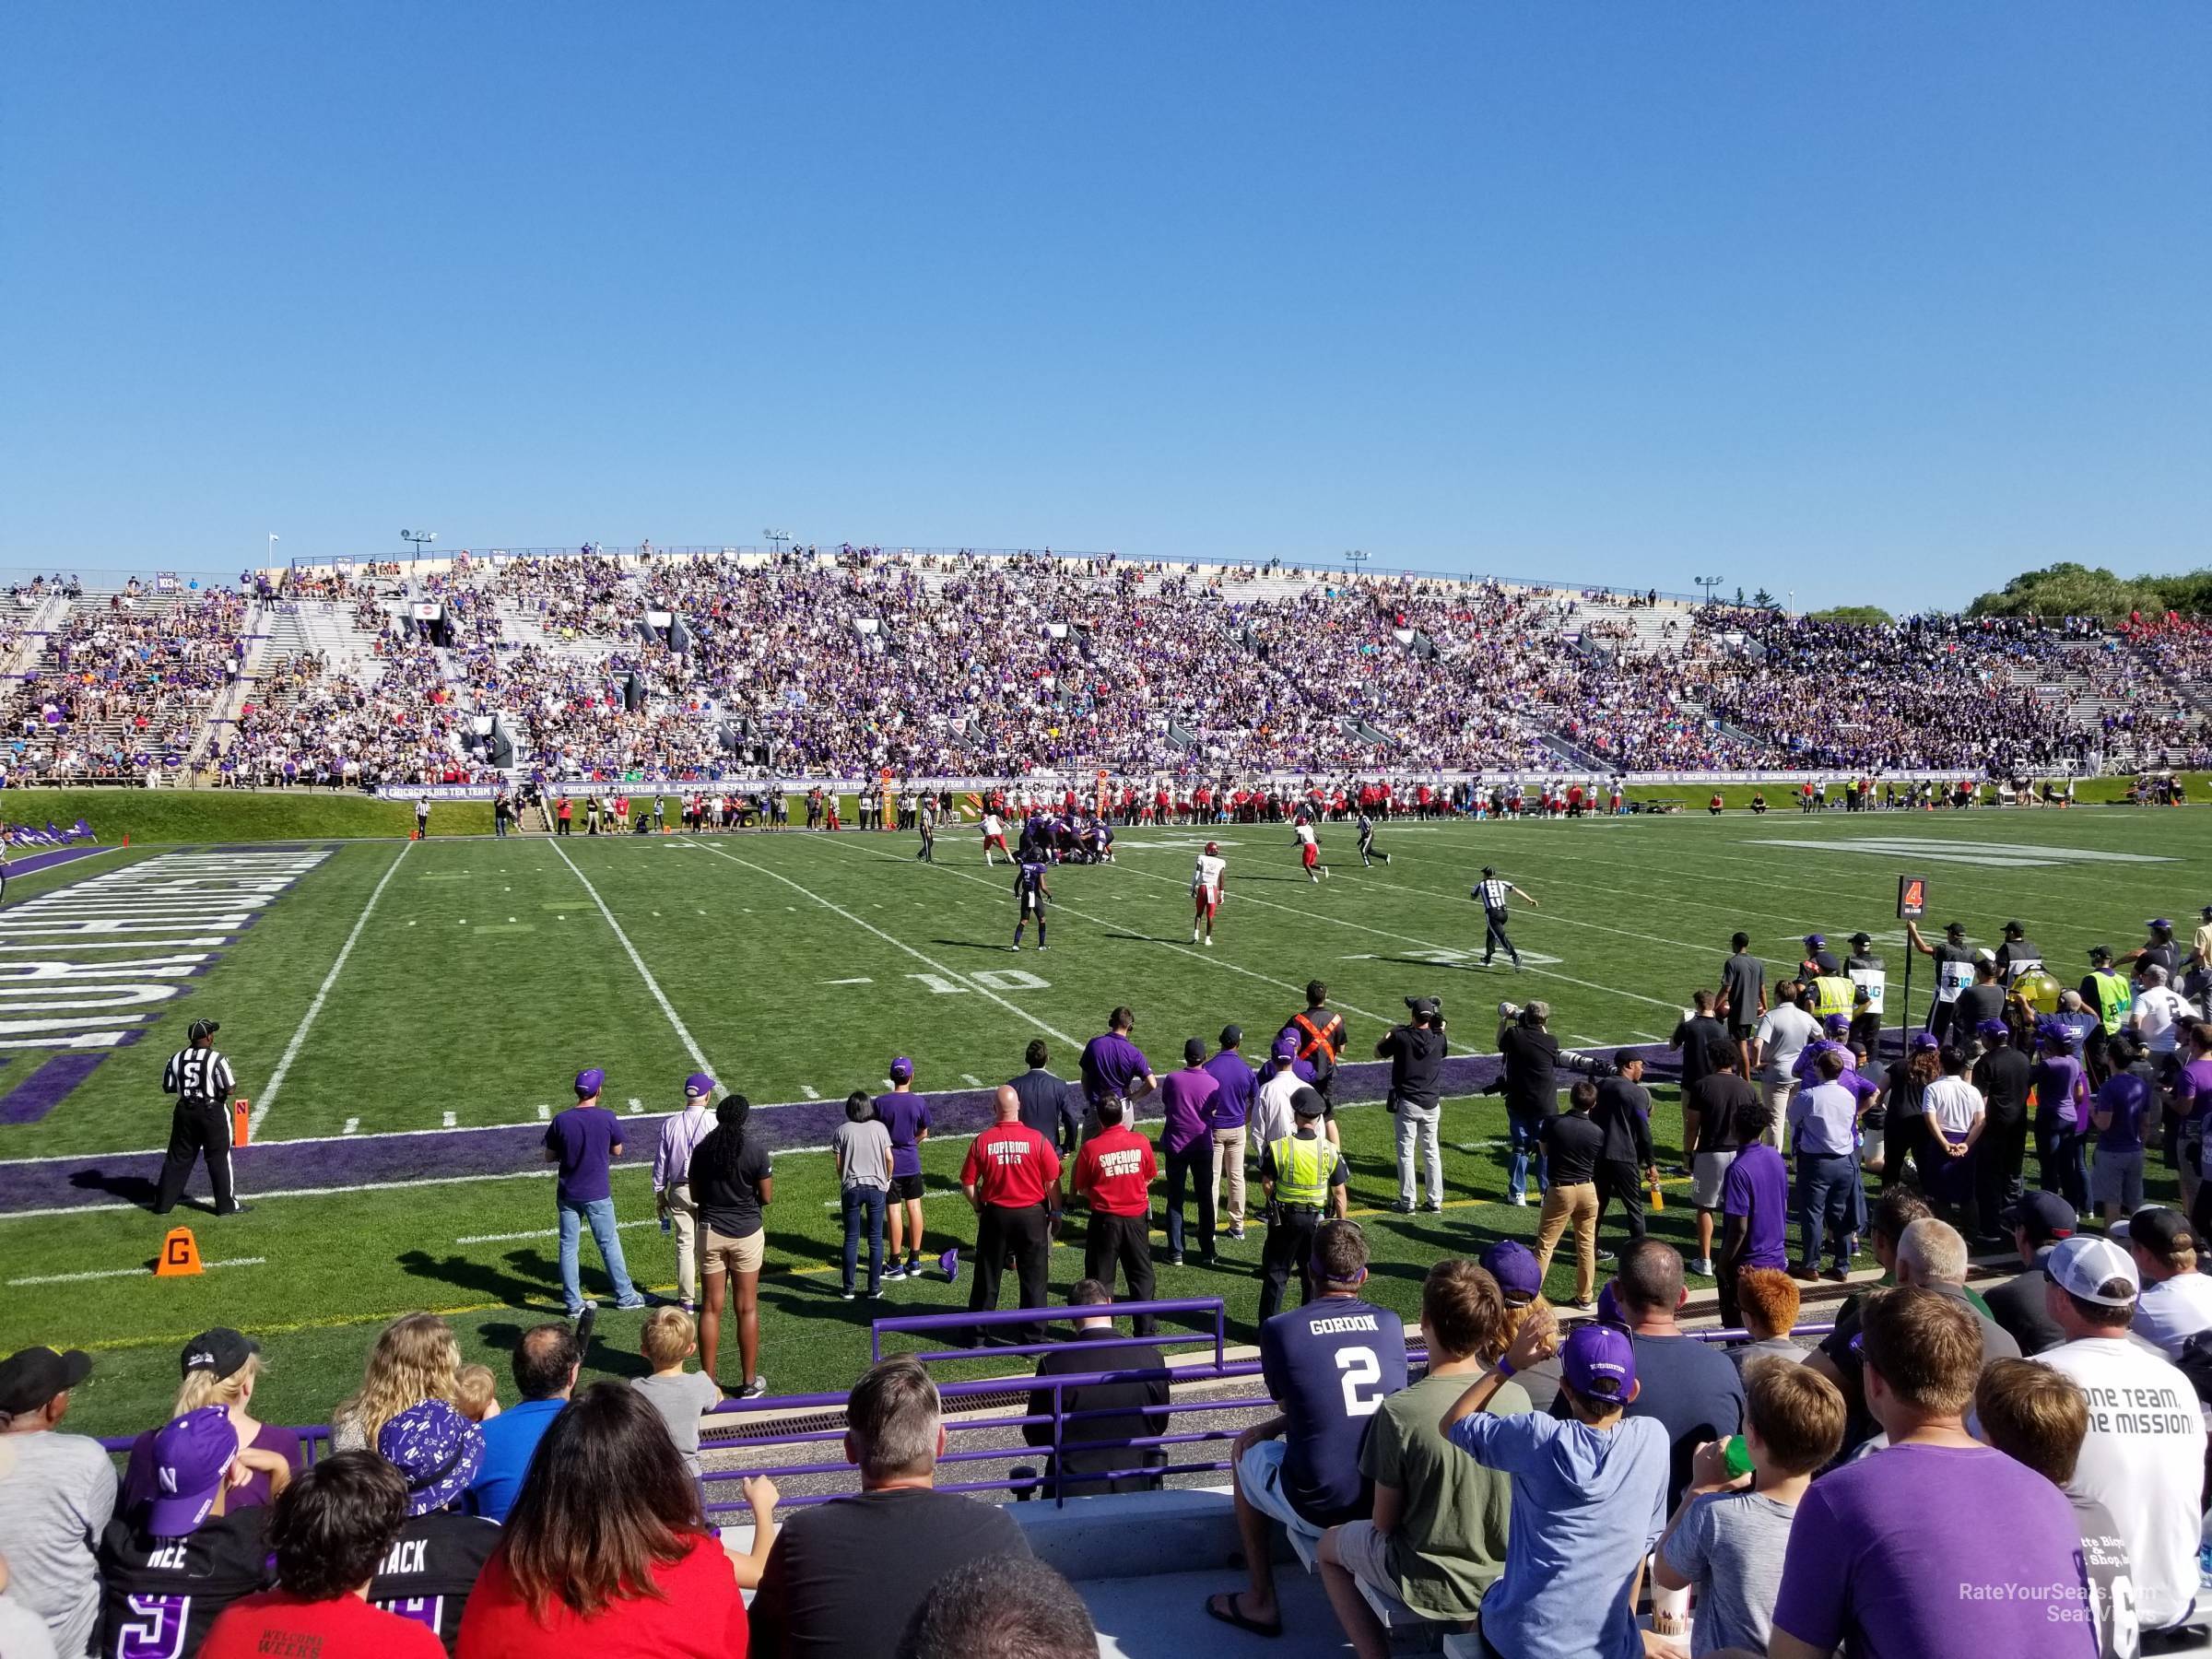 section 133, row 9 seat view  - ryan field